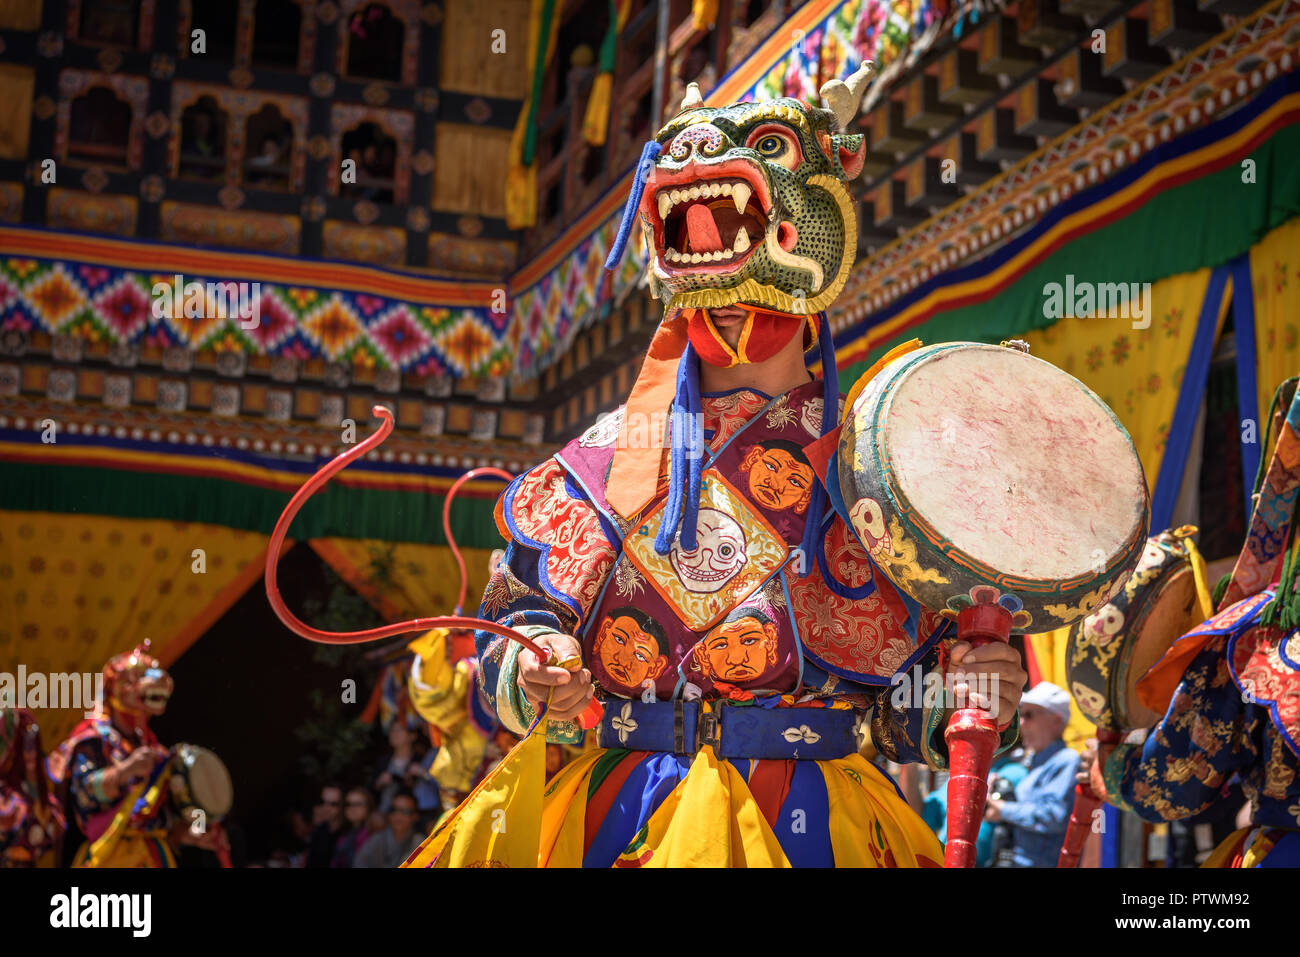 Buddhist Monk dancing and holding a drum at colourful mask dance at yearly buddhism Paro Tsechu festival in Bhutan monastery temple location. Stock Photo